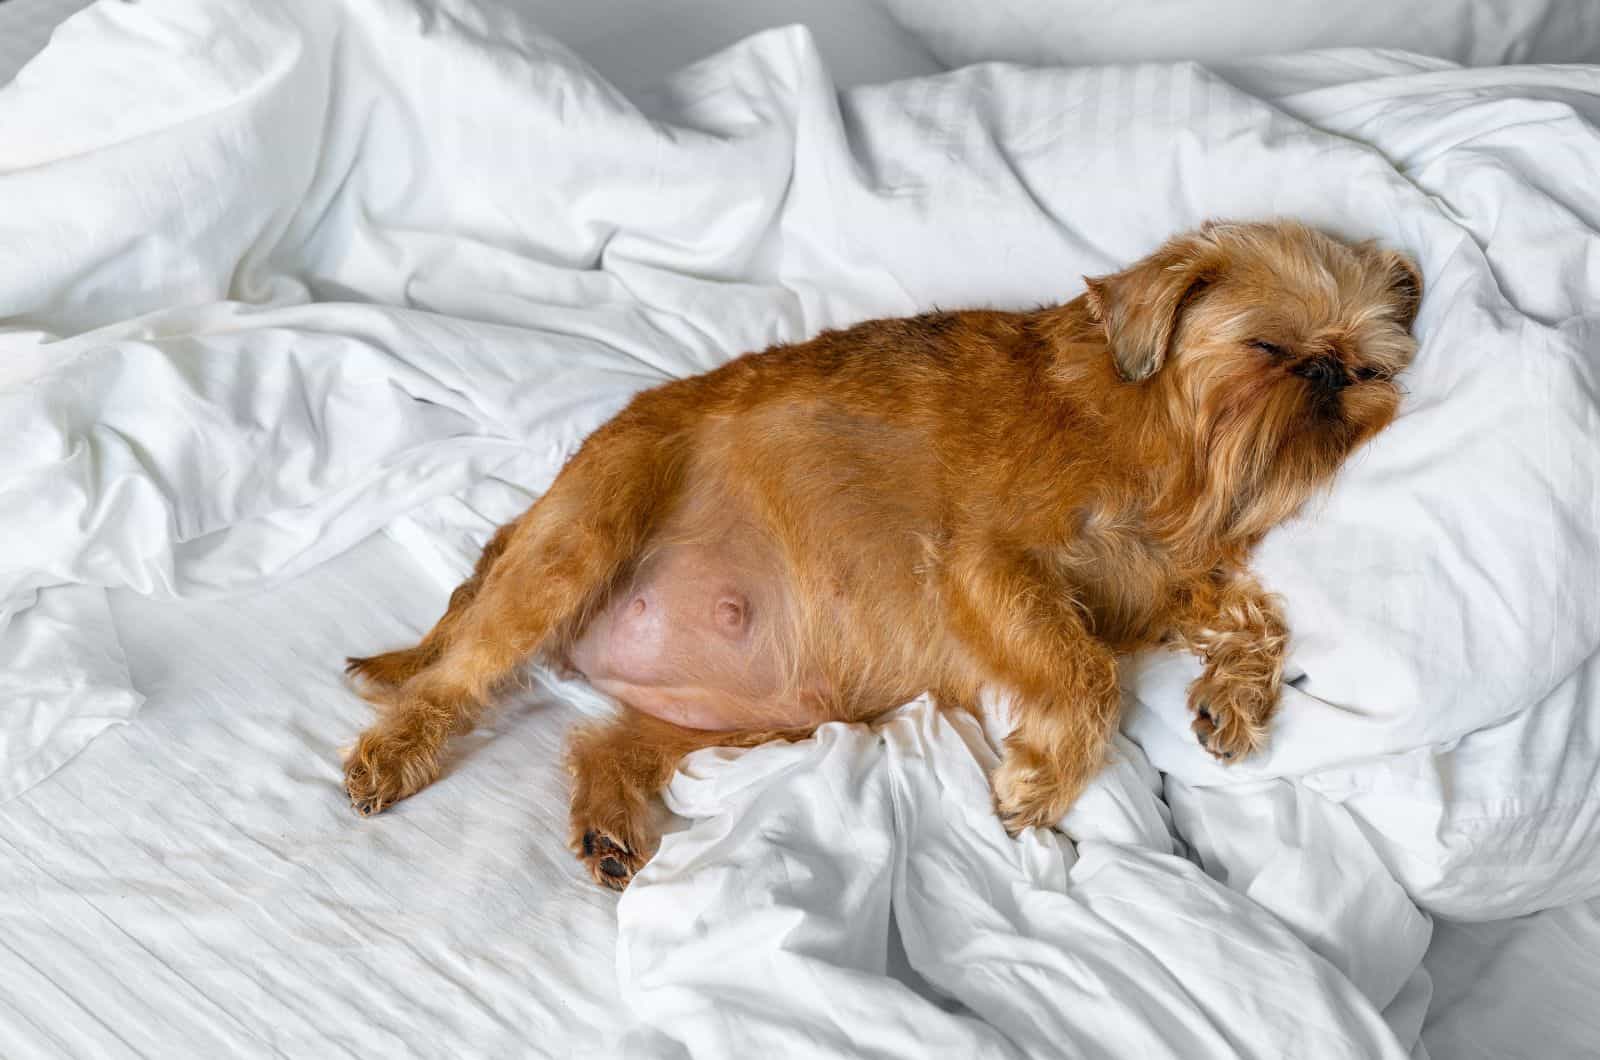 Pregnant dog lying in bed